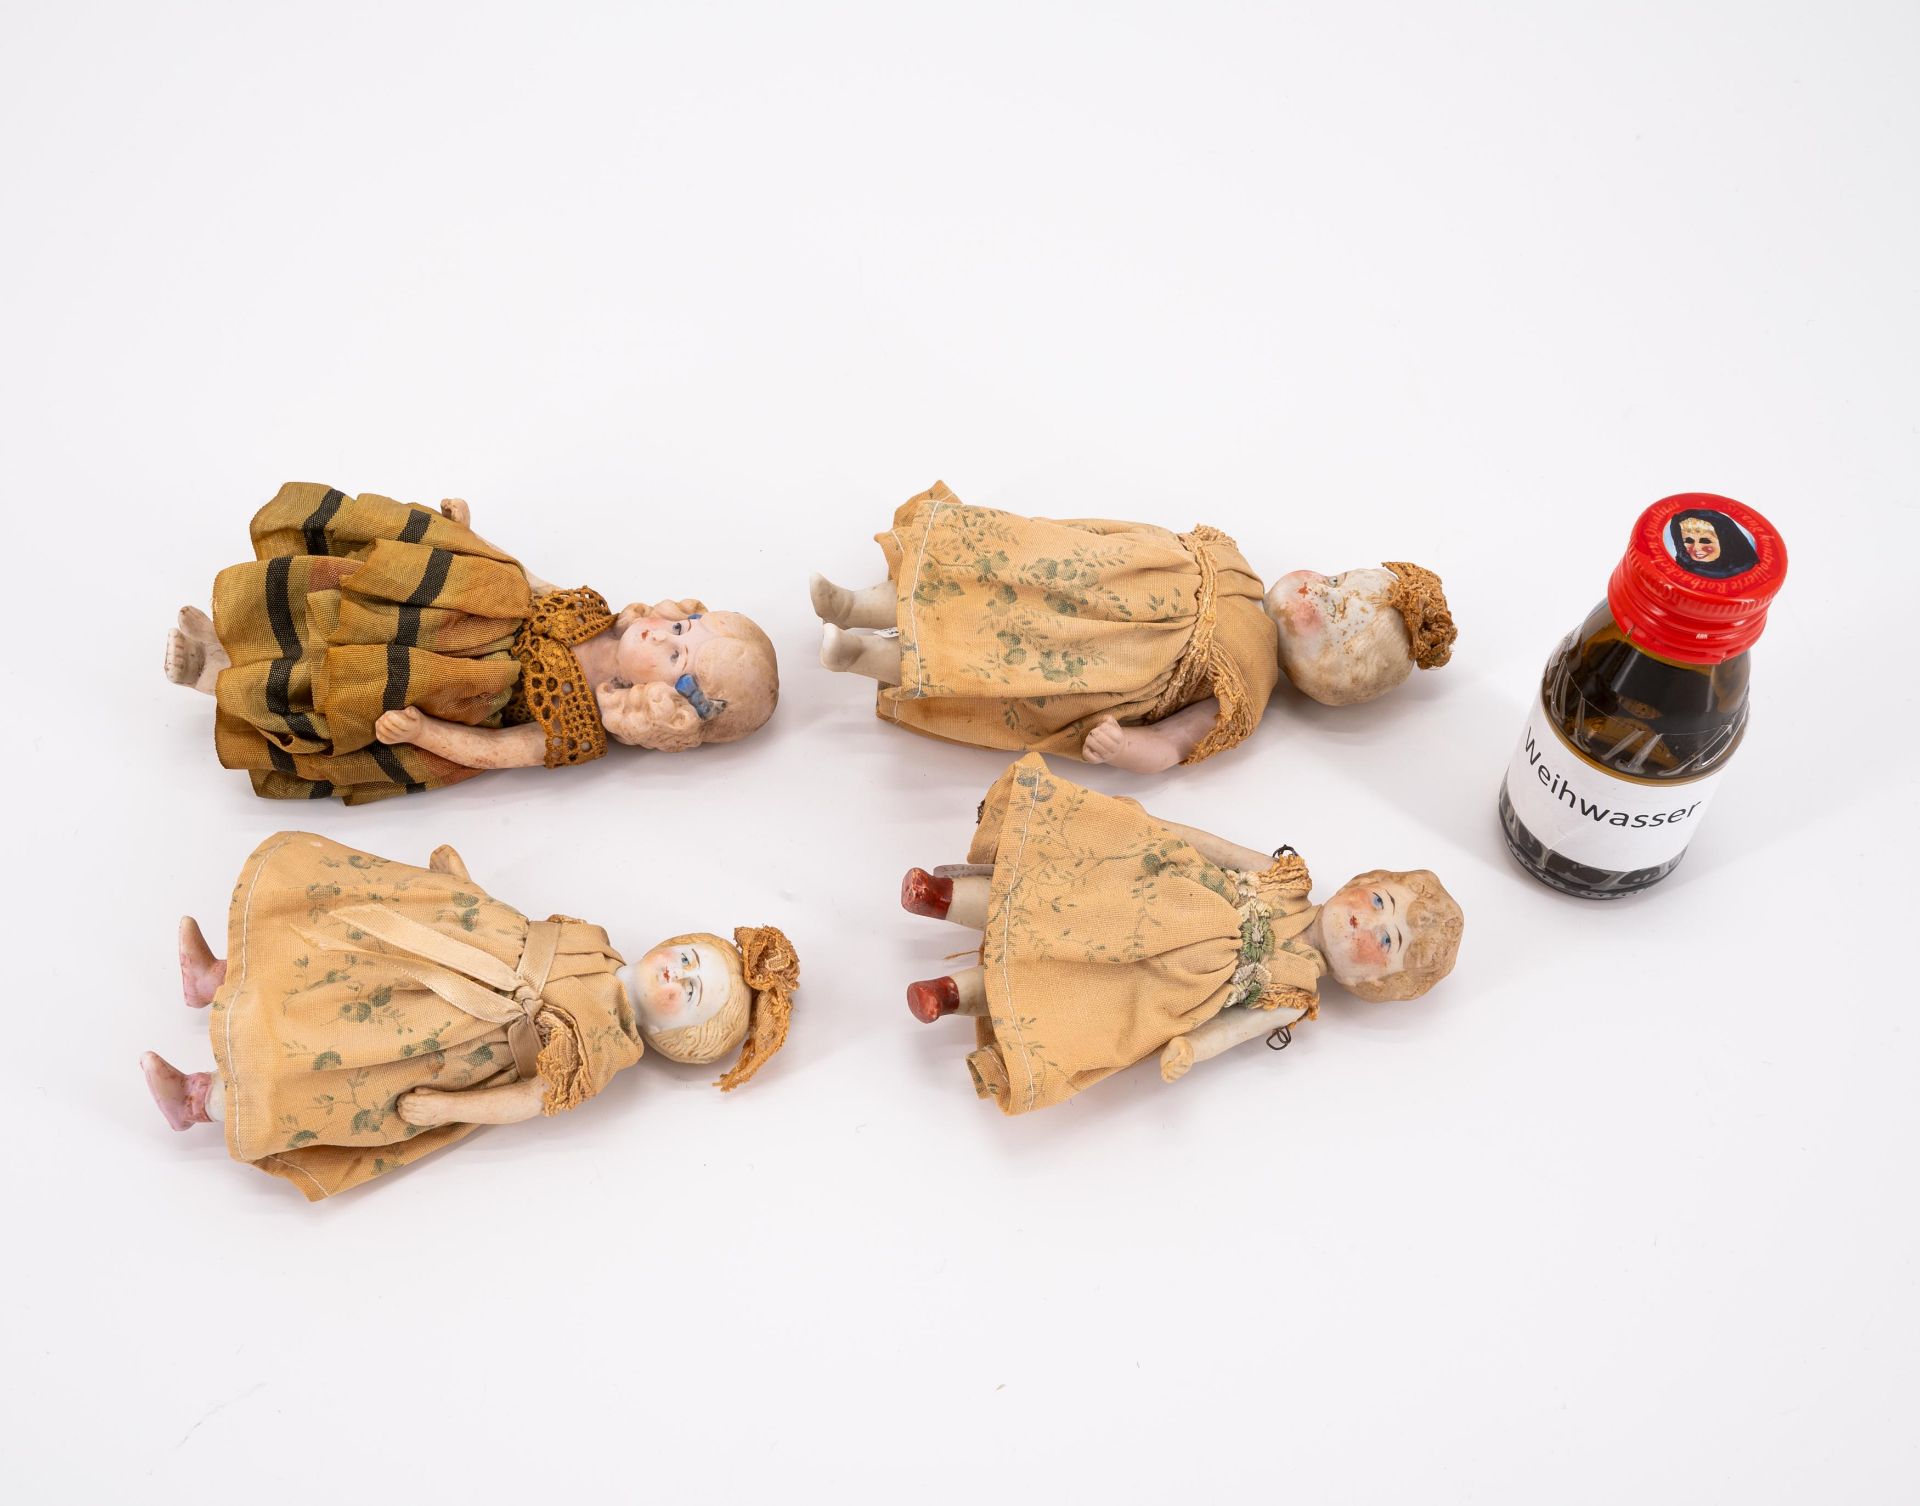 DOLL IN NUN'S HABIT, FOUR BISQUE PORCELAIN HEAD DOLLS AND A DOLL'S HEAD MADE OF PORCELAIN, TEXTILE,  - Image 4 of 5